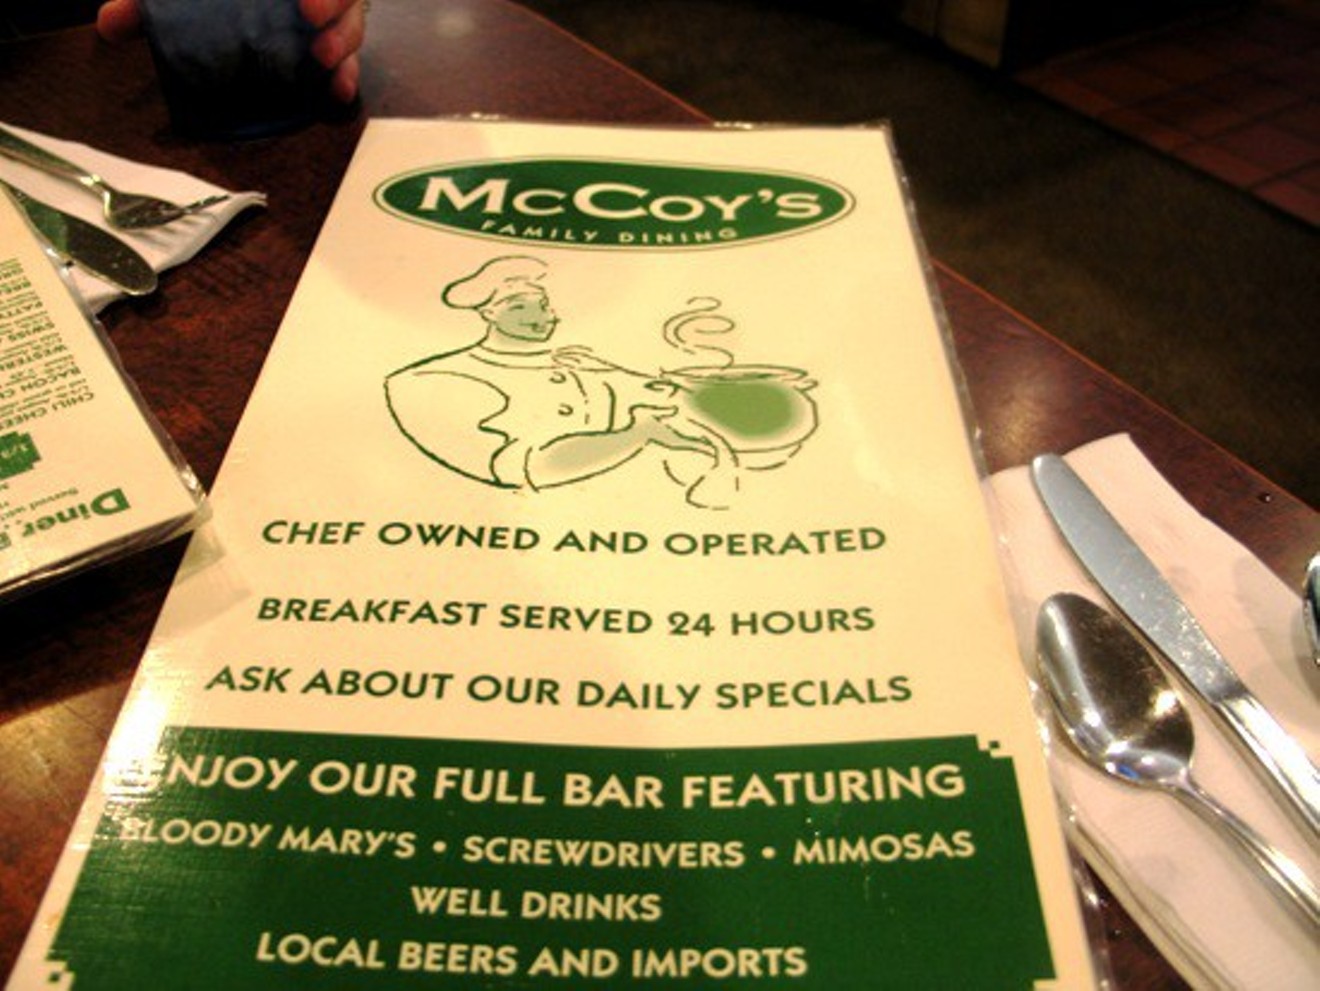 McCoy's is closed for a kitchen remodel but is expected to reopen in February.